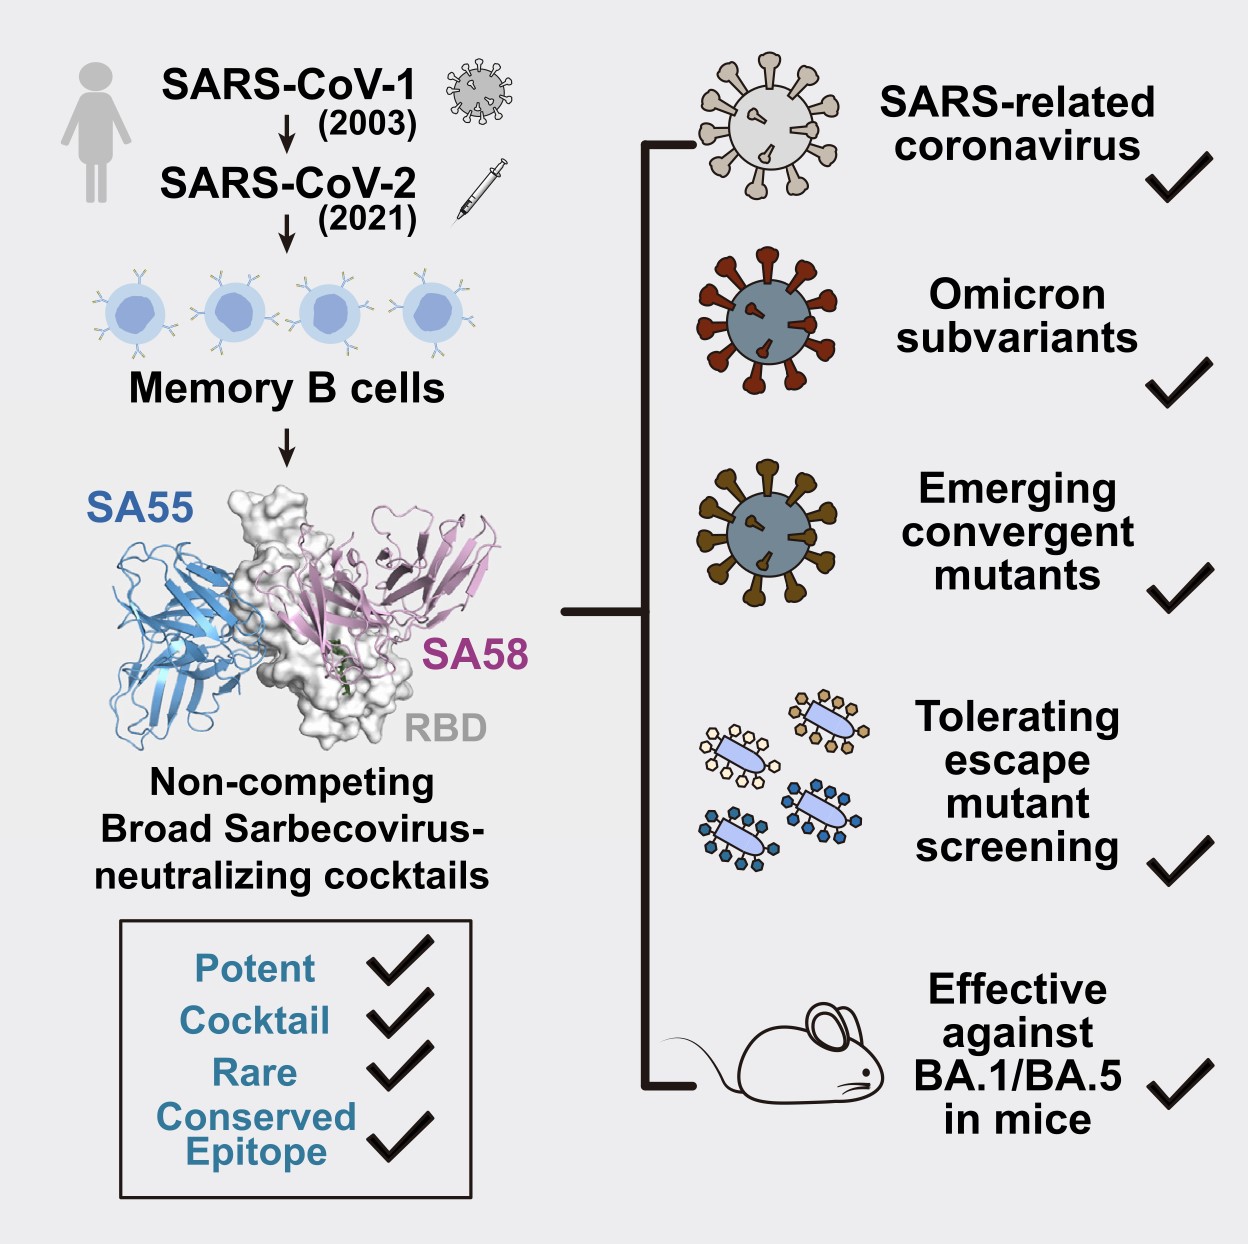 Rational identification of potent and broad sarbecovirus-neutralizing antibody cocktails from SARS convalescents